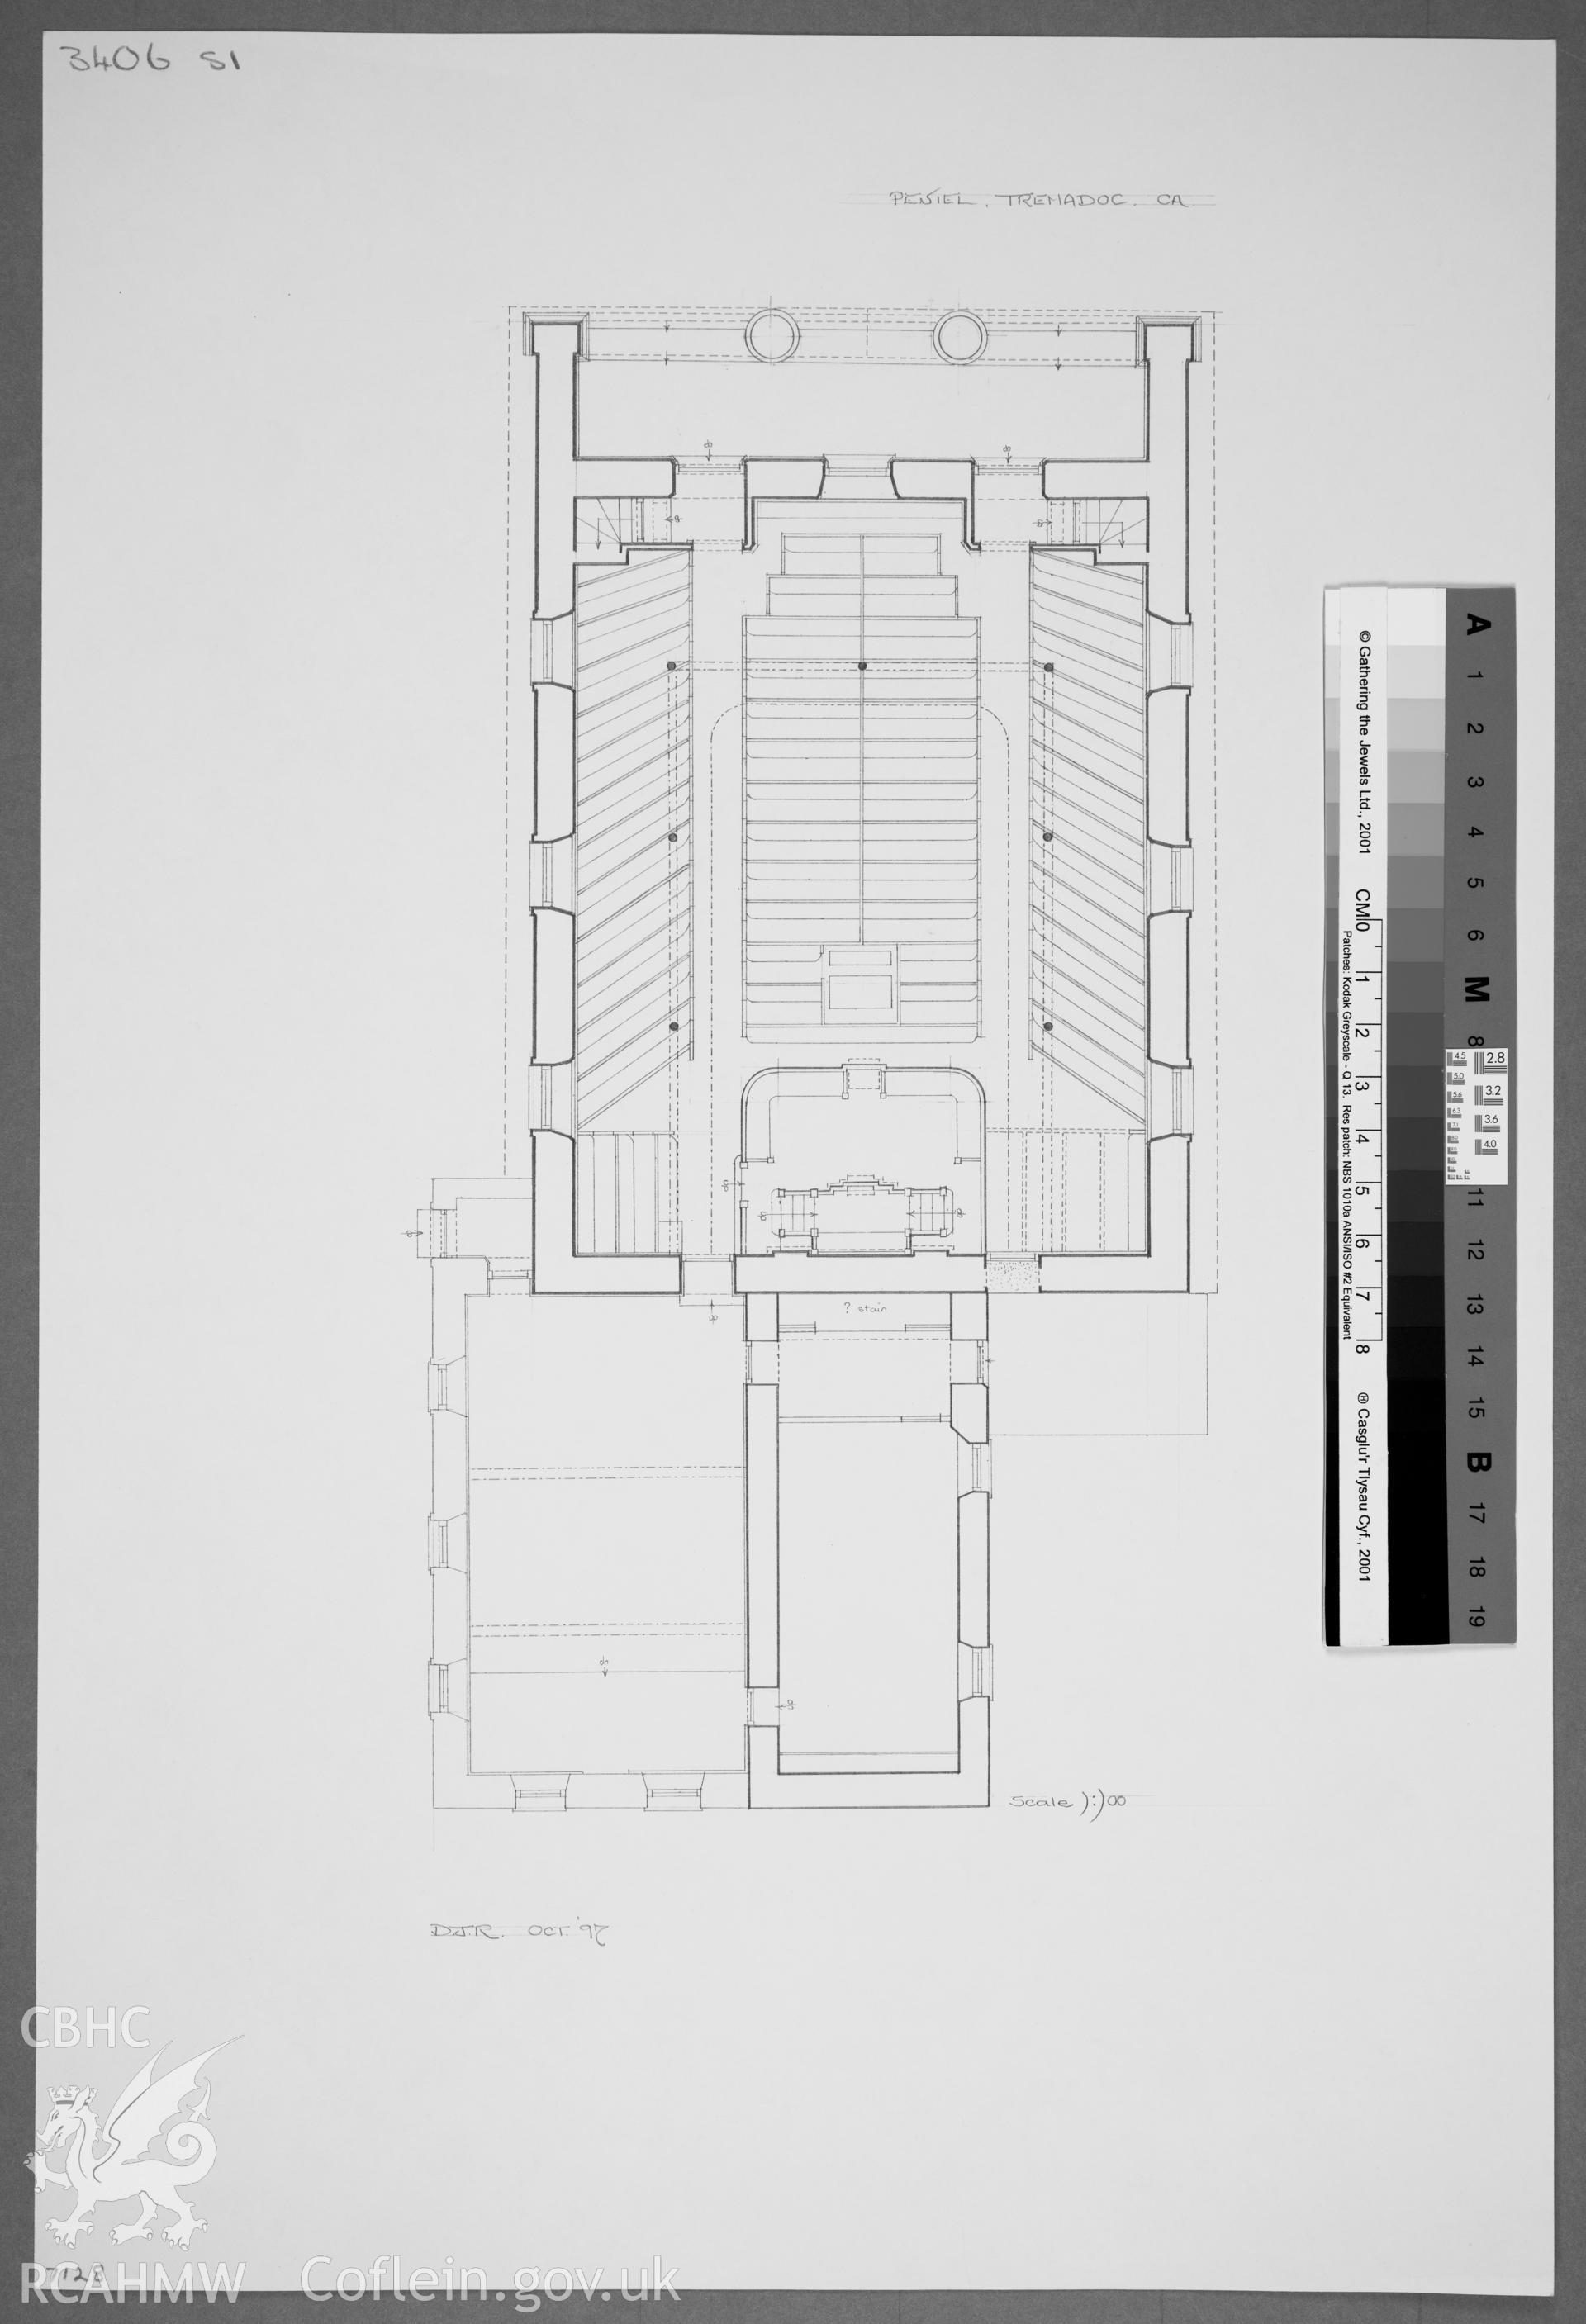 Peniel Chapel, Tremadog; Measured drawing showing plan of chapel, surveyed and drawn by Dylan Roberts dated October 1997.